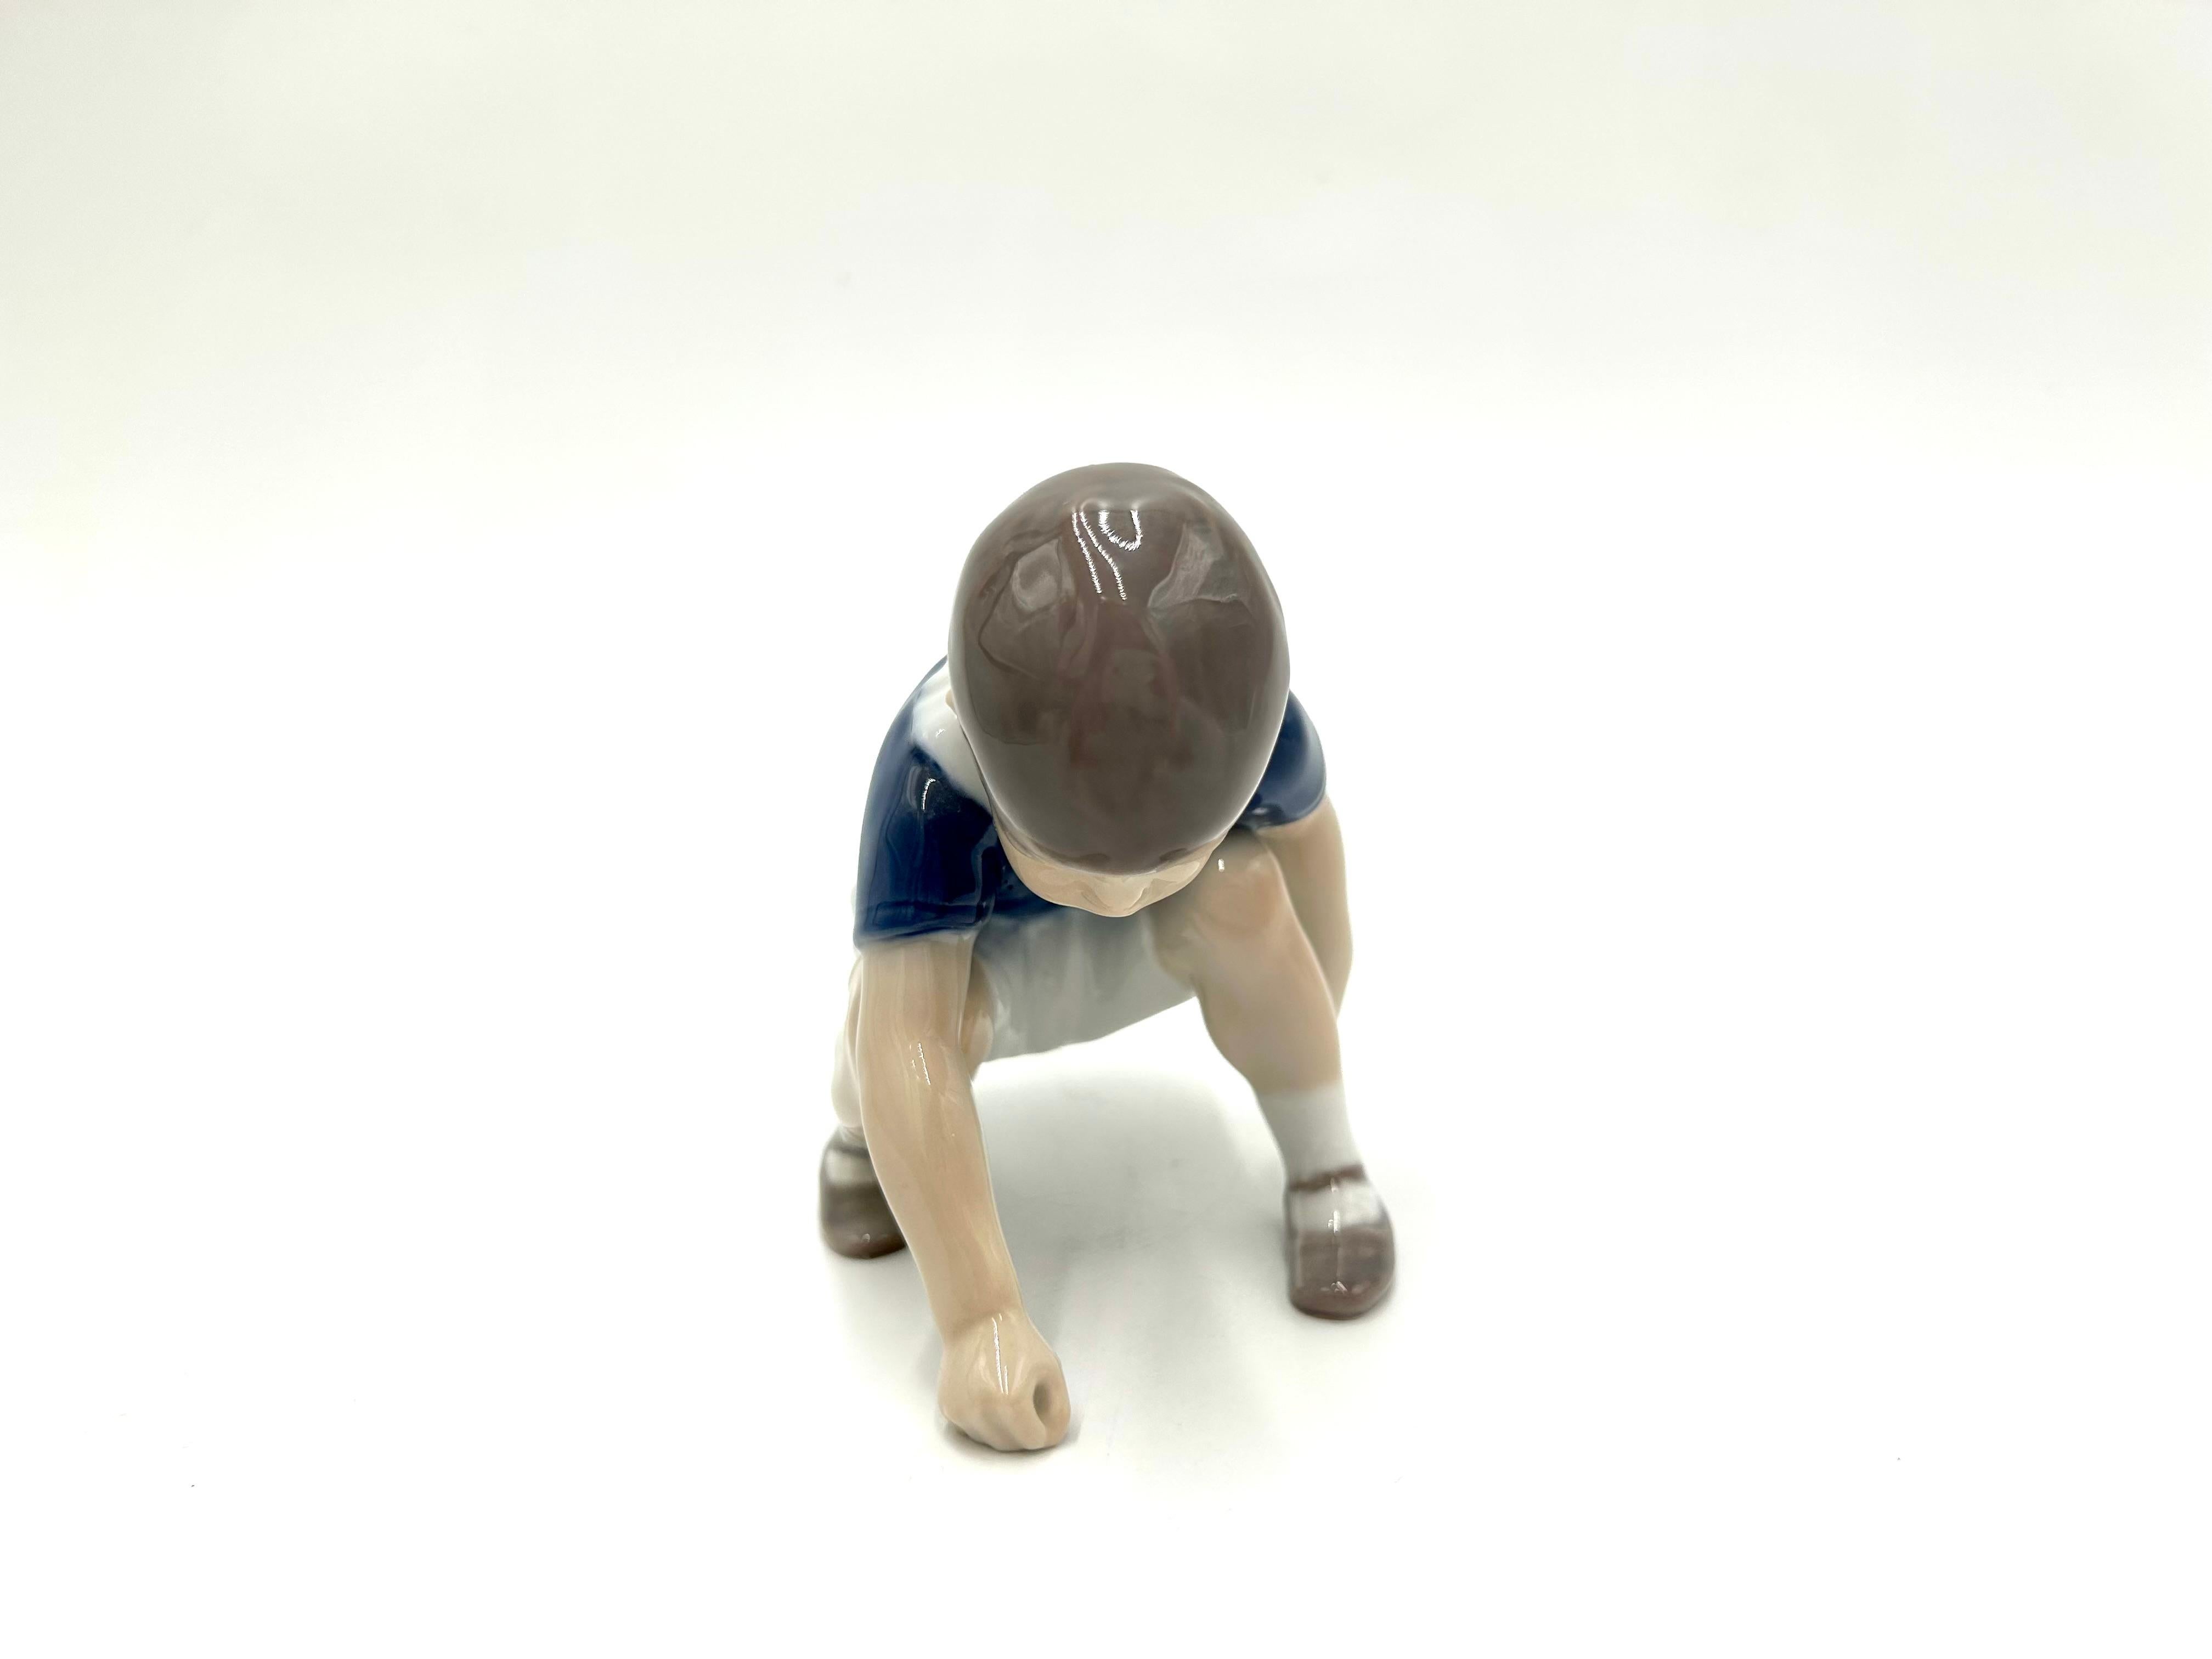 Porcelain figurine of a crouching boy playing
Produced by the Danish manufactory Bing & Grondahl
The mark is used in the 1960s
Very good condition without damage
Measures: Height: 10cm
Width: 10cm
Depth: 10cm.